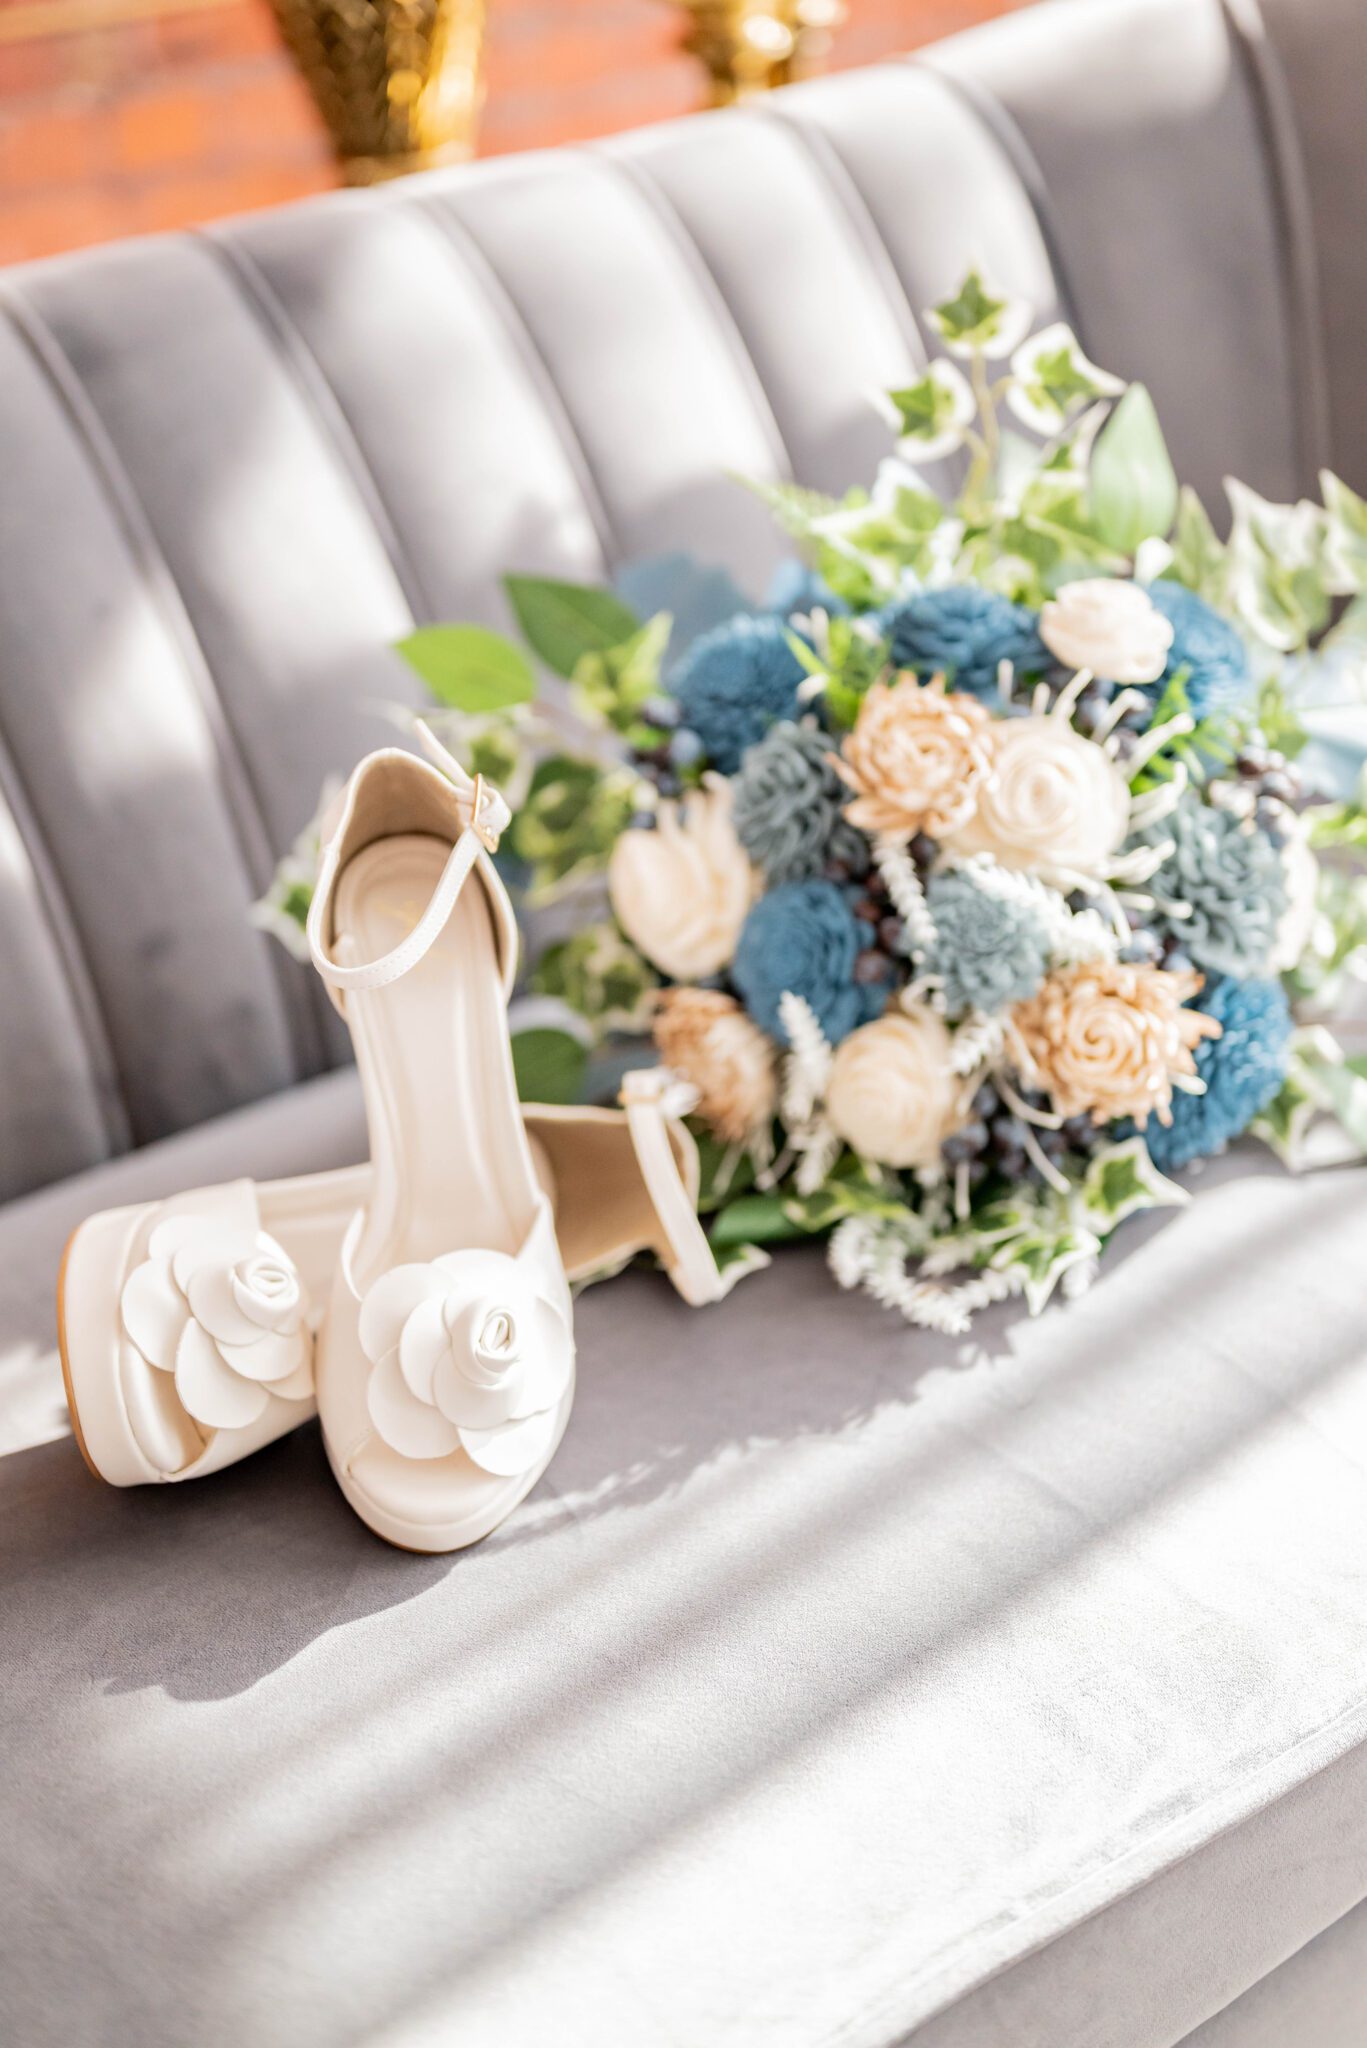 Vintage white bridal heels with ankle strap and large flower on the toe next to baby blue and peach bouquet with ivy accents, detail photo of bridal shoes and bouquet on grey velvet couch